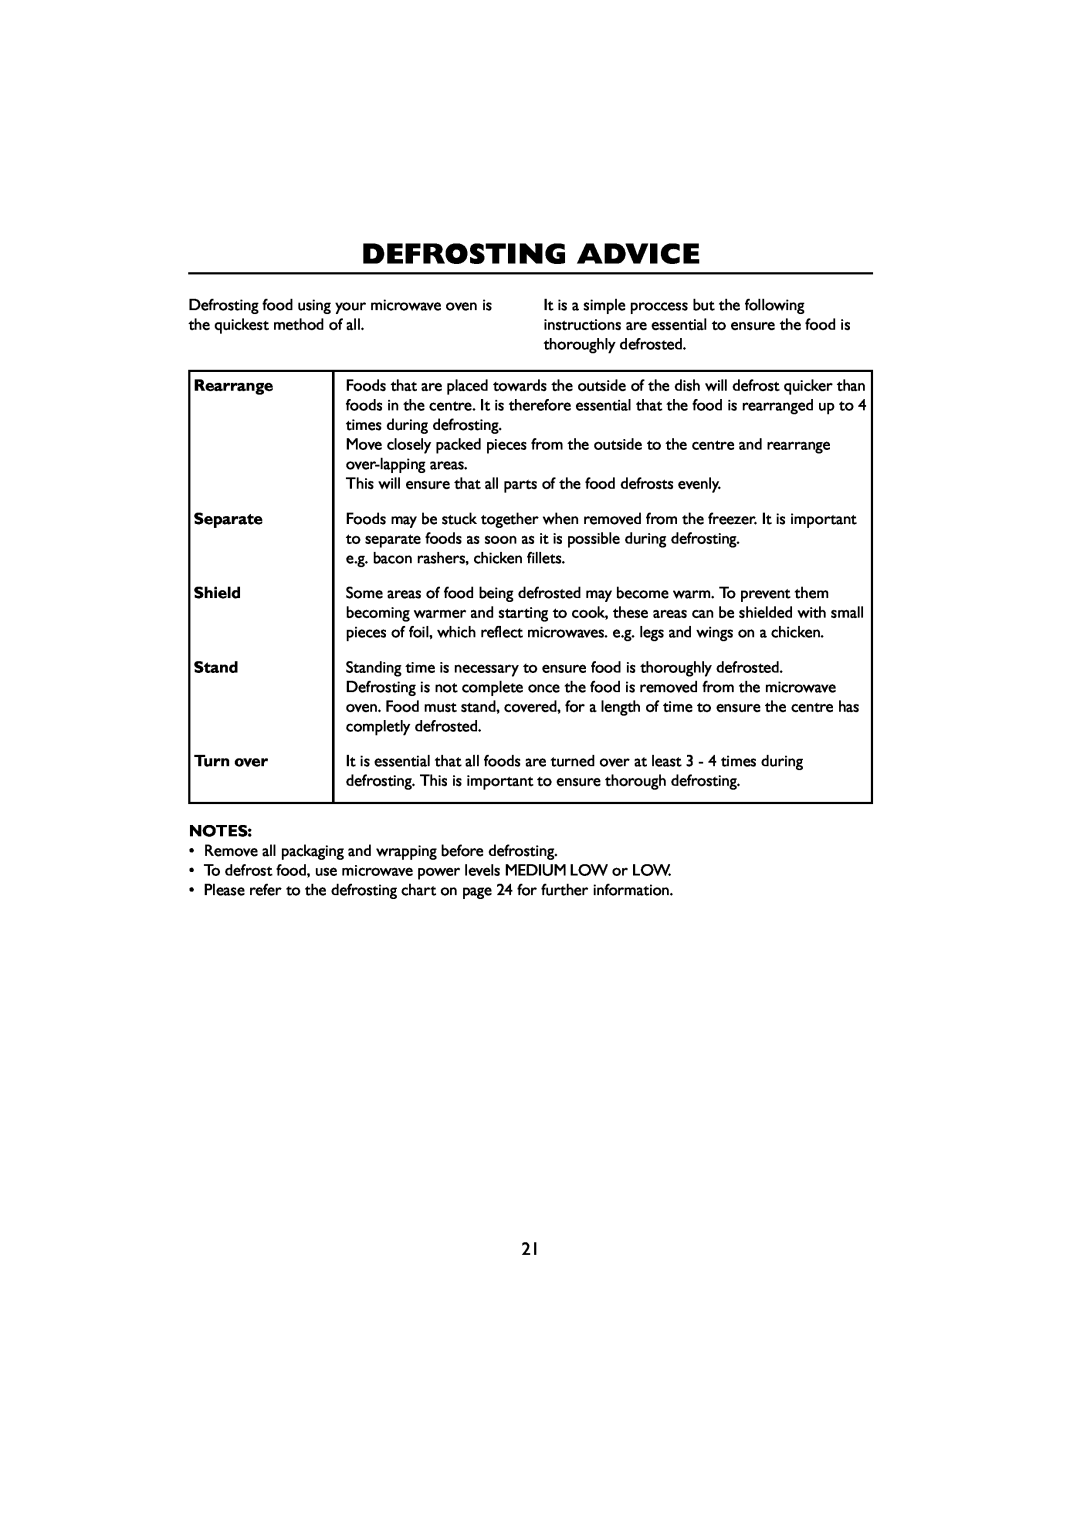 Sharp R-259 operation manual Defrosting Advice, Rearrange Separate Shield Stand Turn over 